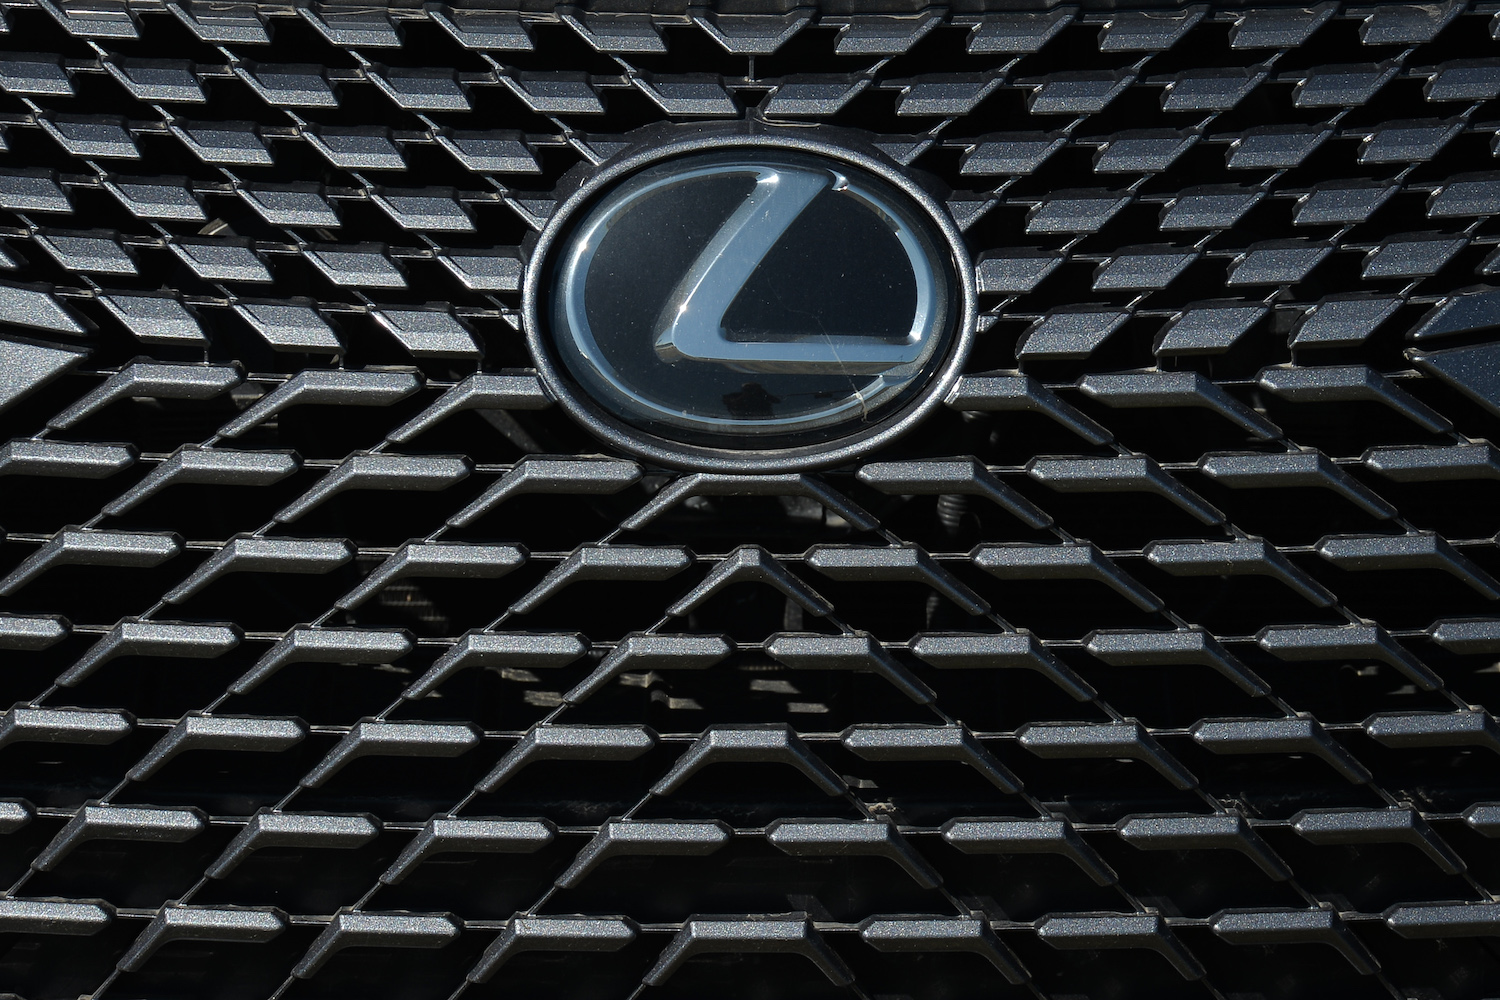 The Lexus logo on the grille of a crossover luxury SUV parked at a used vehicle dealership.